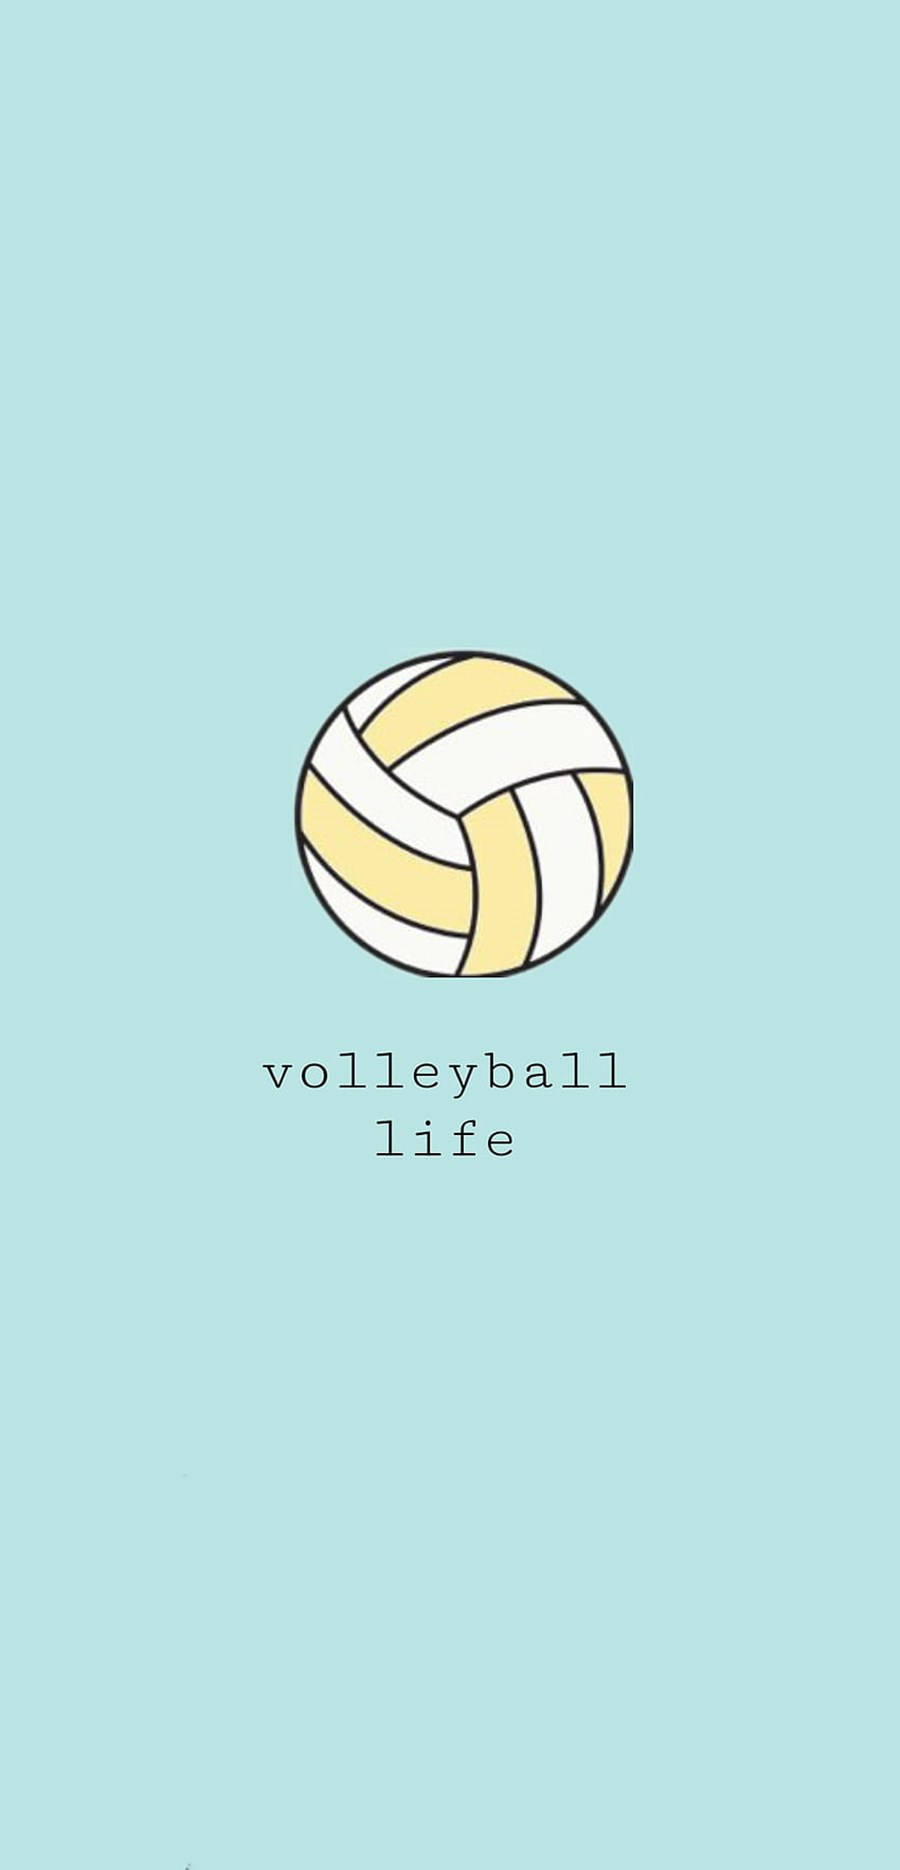 Volleyball Demigirl Aesthetic  Volleyball wallpaper Volleyball backgrounds  Volleyball workouts